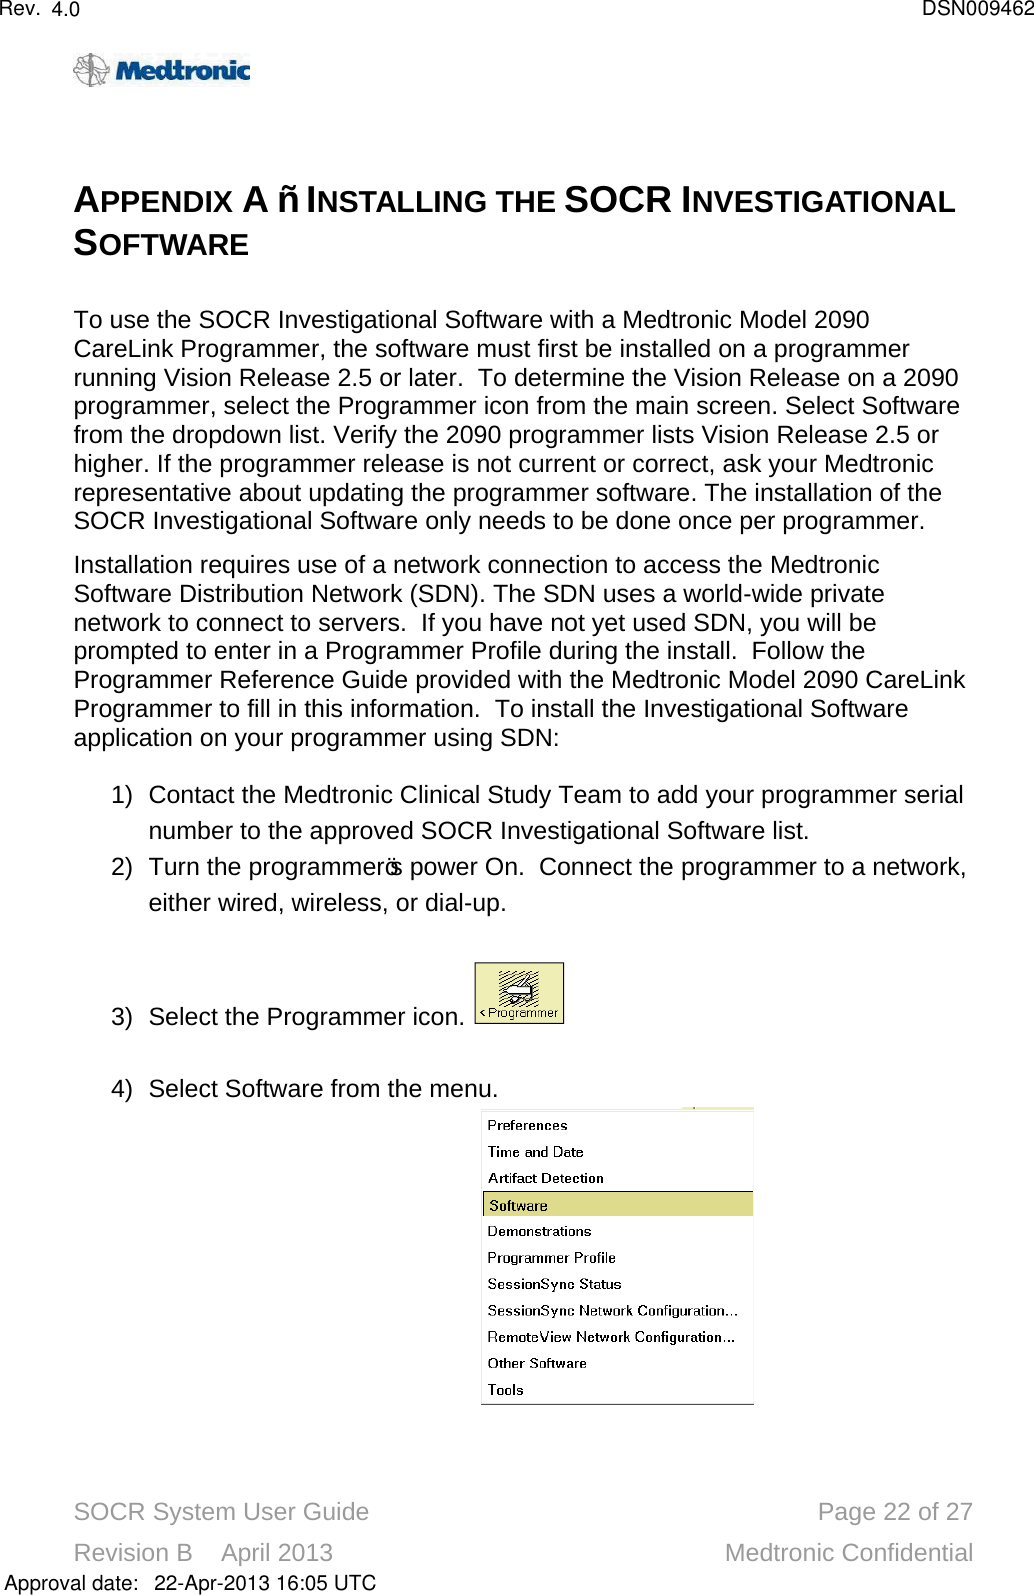 SOCR System User Guide Page 22 of 27Revision B    April 2013 Medtronic ConfidentialAPPENDIX A – INSTALLING THE SOCR INVESTIGATIONALSOFTWARETo use the SOCR Investigational Software with a Medtronic Model 2090 CareLink Programmer, the software must first be installed on a programmer running Vision Release 2.5 or later.  To determine the Vision Release on a 2090 programmer, select the Programmer icon from the main screen. Select Software from the dropdown list. Verify the 2090 programmer lists Vision Release 2.5 or higher. If the programmer release is not current or correct, ask your Medtronic representative about updating the programmer software. The installation of the SOCR Investigational Software only needs to be done once per programmer.Installation requires use of a network connection to access the Medtronic Software Distribution Network (SDN).The SDN uses a world-wide private network to connect to servers.  If you have not yet used SDN, you will be prompted to enter in a Programmer Profile during the install.  Follow the Programmer Reference Guide provided with the Medtronic Model 2090 CareLink Programmer to fill in this information.  To install the Investigational Software application on your programmer using SDN:1) Contact the Medtronic Clinical Study Team to add your programmer serial number to the approved SOCR Investigational Software list.2) Turn the programmer’s power On.  Connect the programmer to a network, either wired, wireless, or dial-up.  3) Select the Programmer icon. 4) Select Software from the menu.Approval date:4.0 DSN00946222-Apr-2013 16:05 UTCRev.